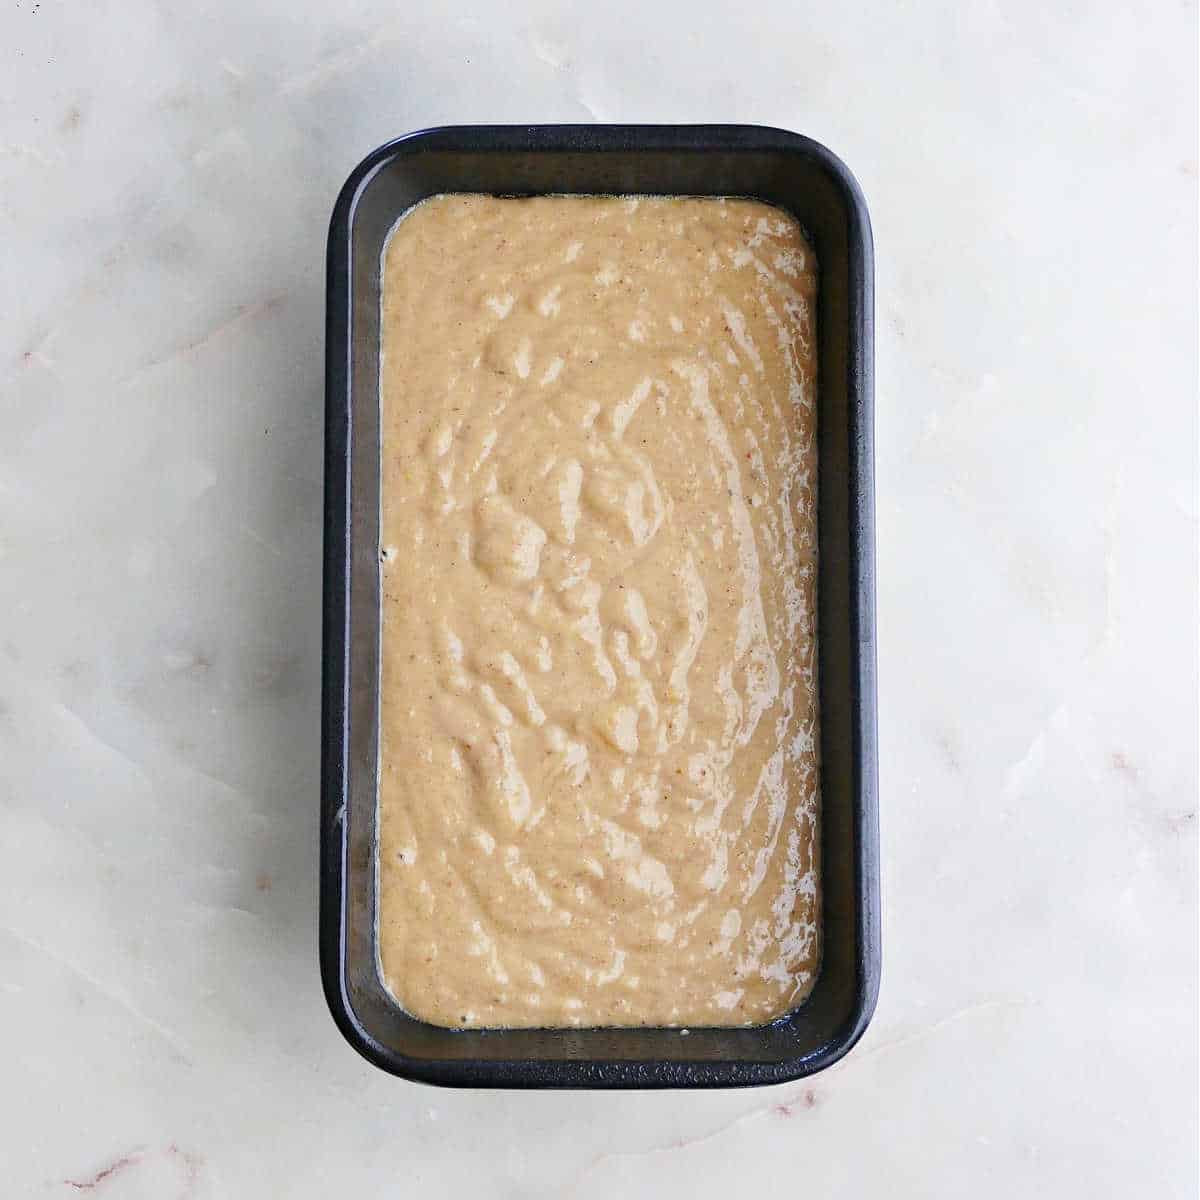 batter for squash bread in a loaf pan before baking